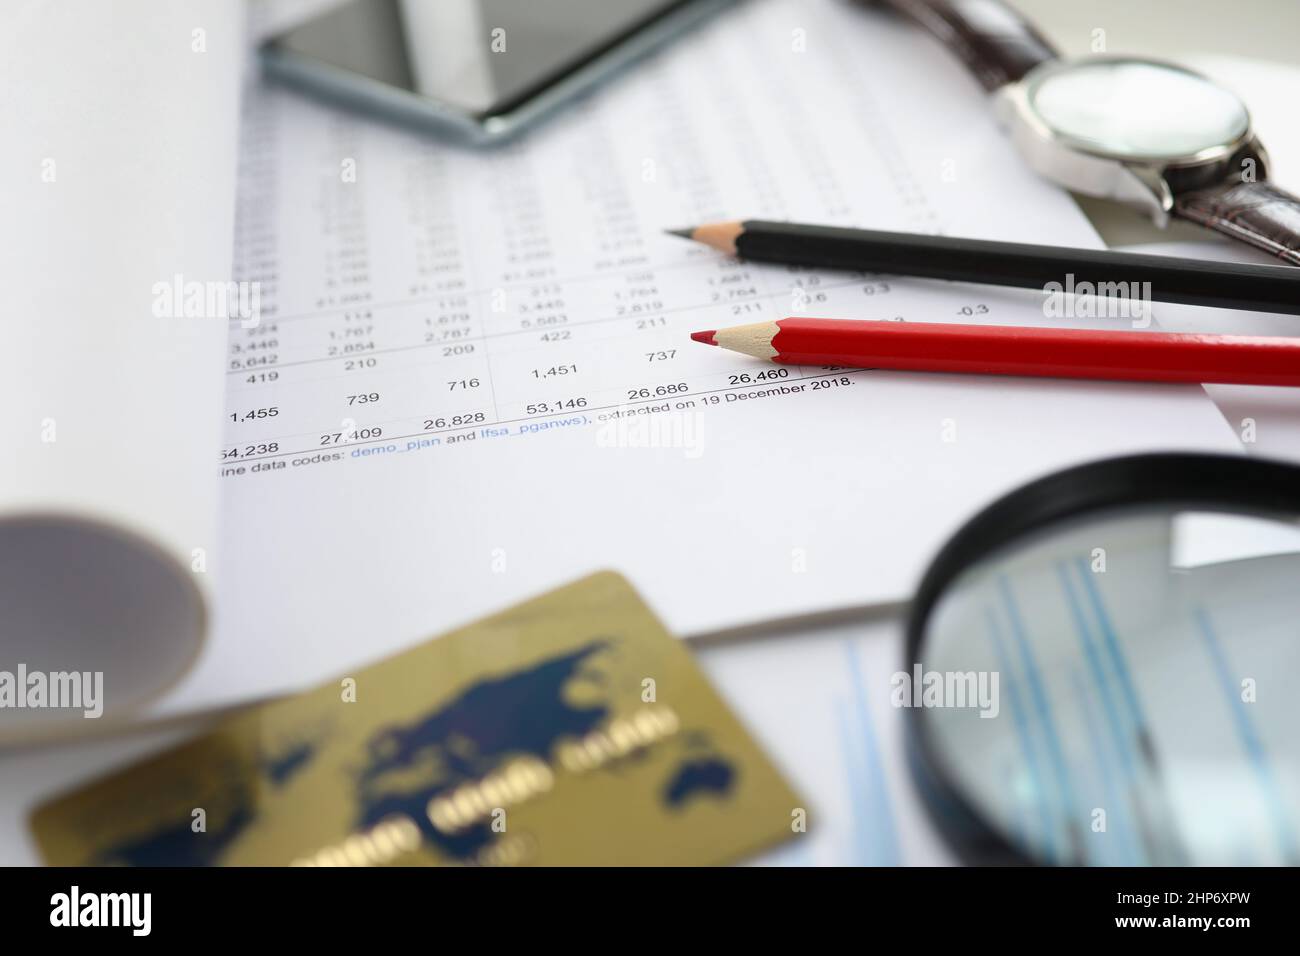 Financial documents and a credit card are on table Stock Photo